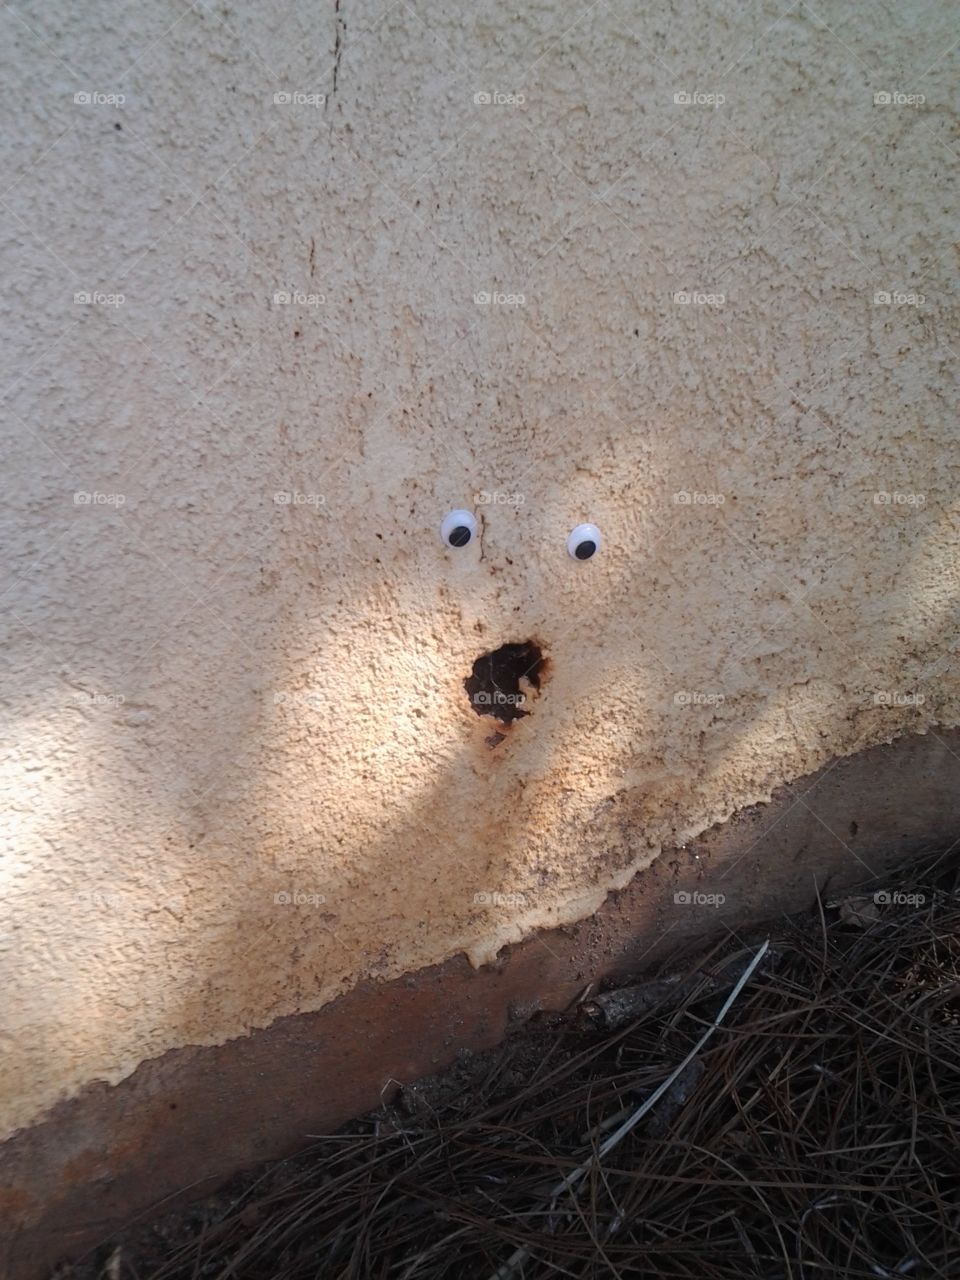 Face in the Plaster Wall